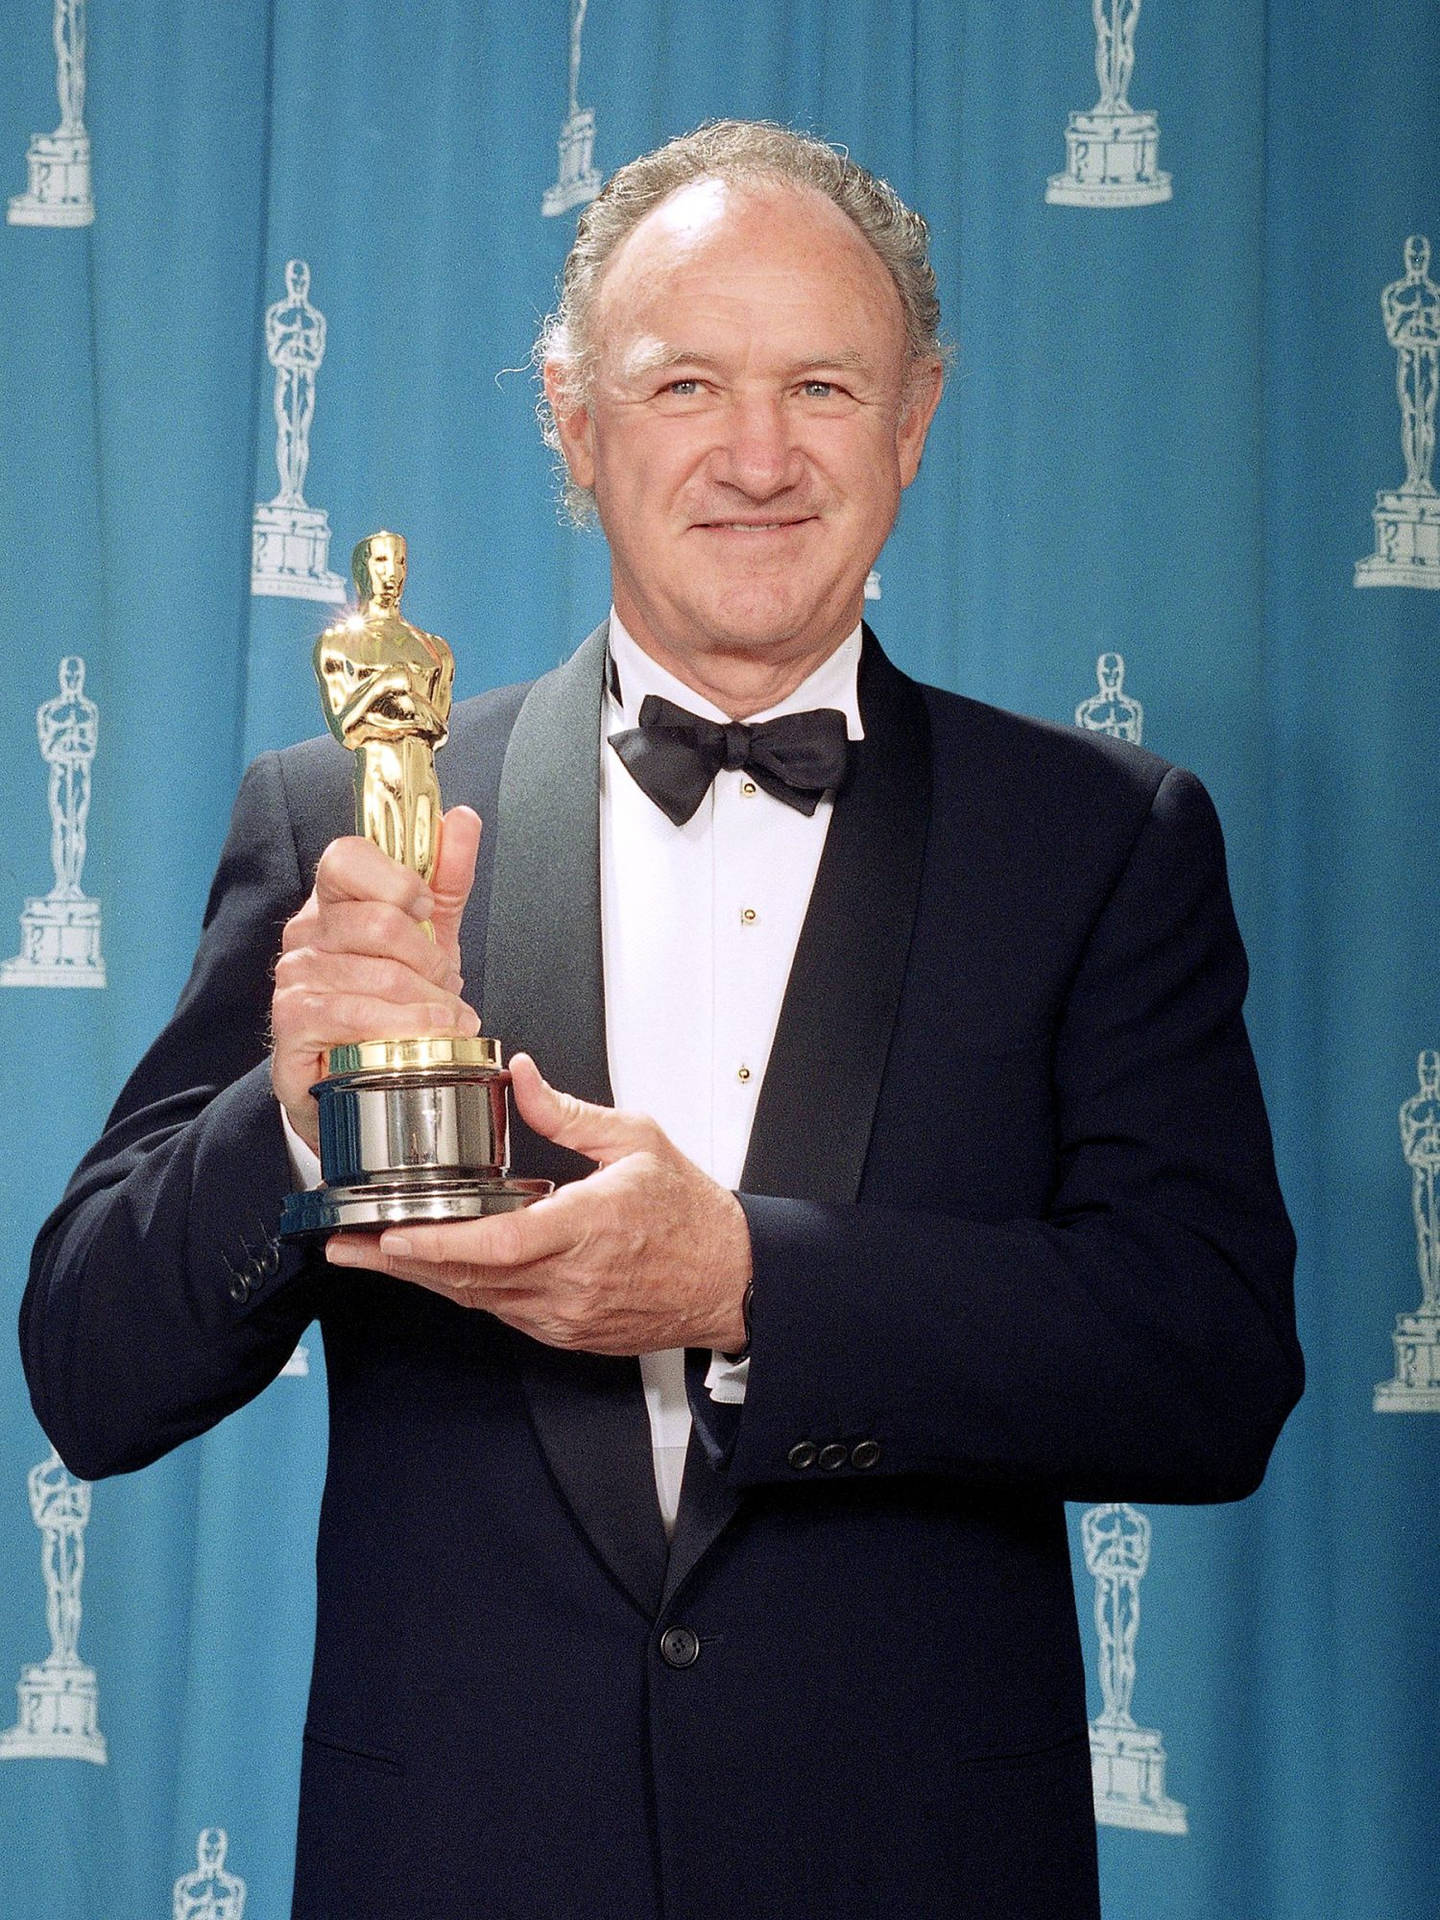 Didyou Know That You Can Transform Your Computer Or Mobile Wallpaper Into A Tribute To The Legendary Actor Gene Hackman? Celebrate His Illustrious Career And Impressive Collection Of Oscars With A Captivating Wallpaper. Sfondo